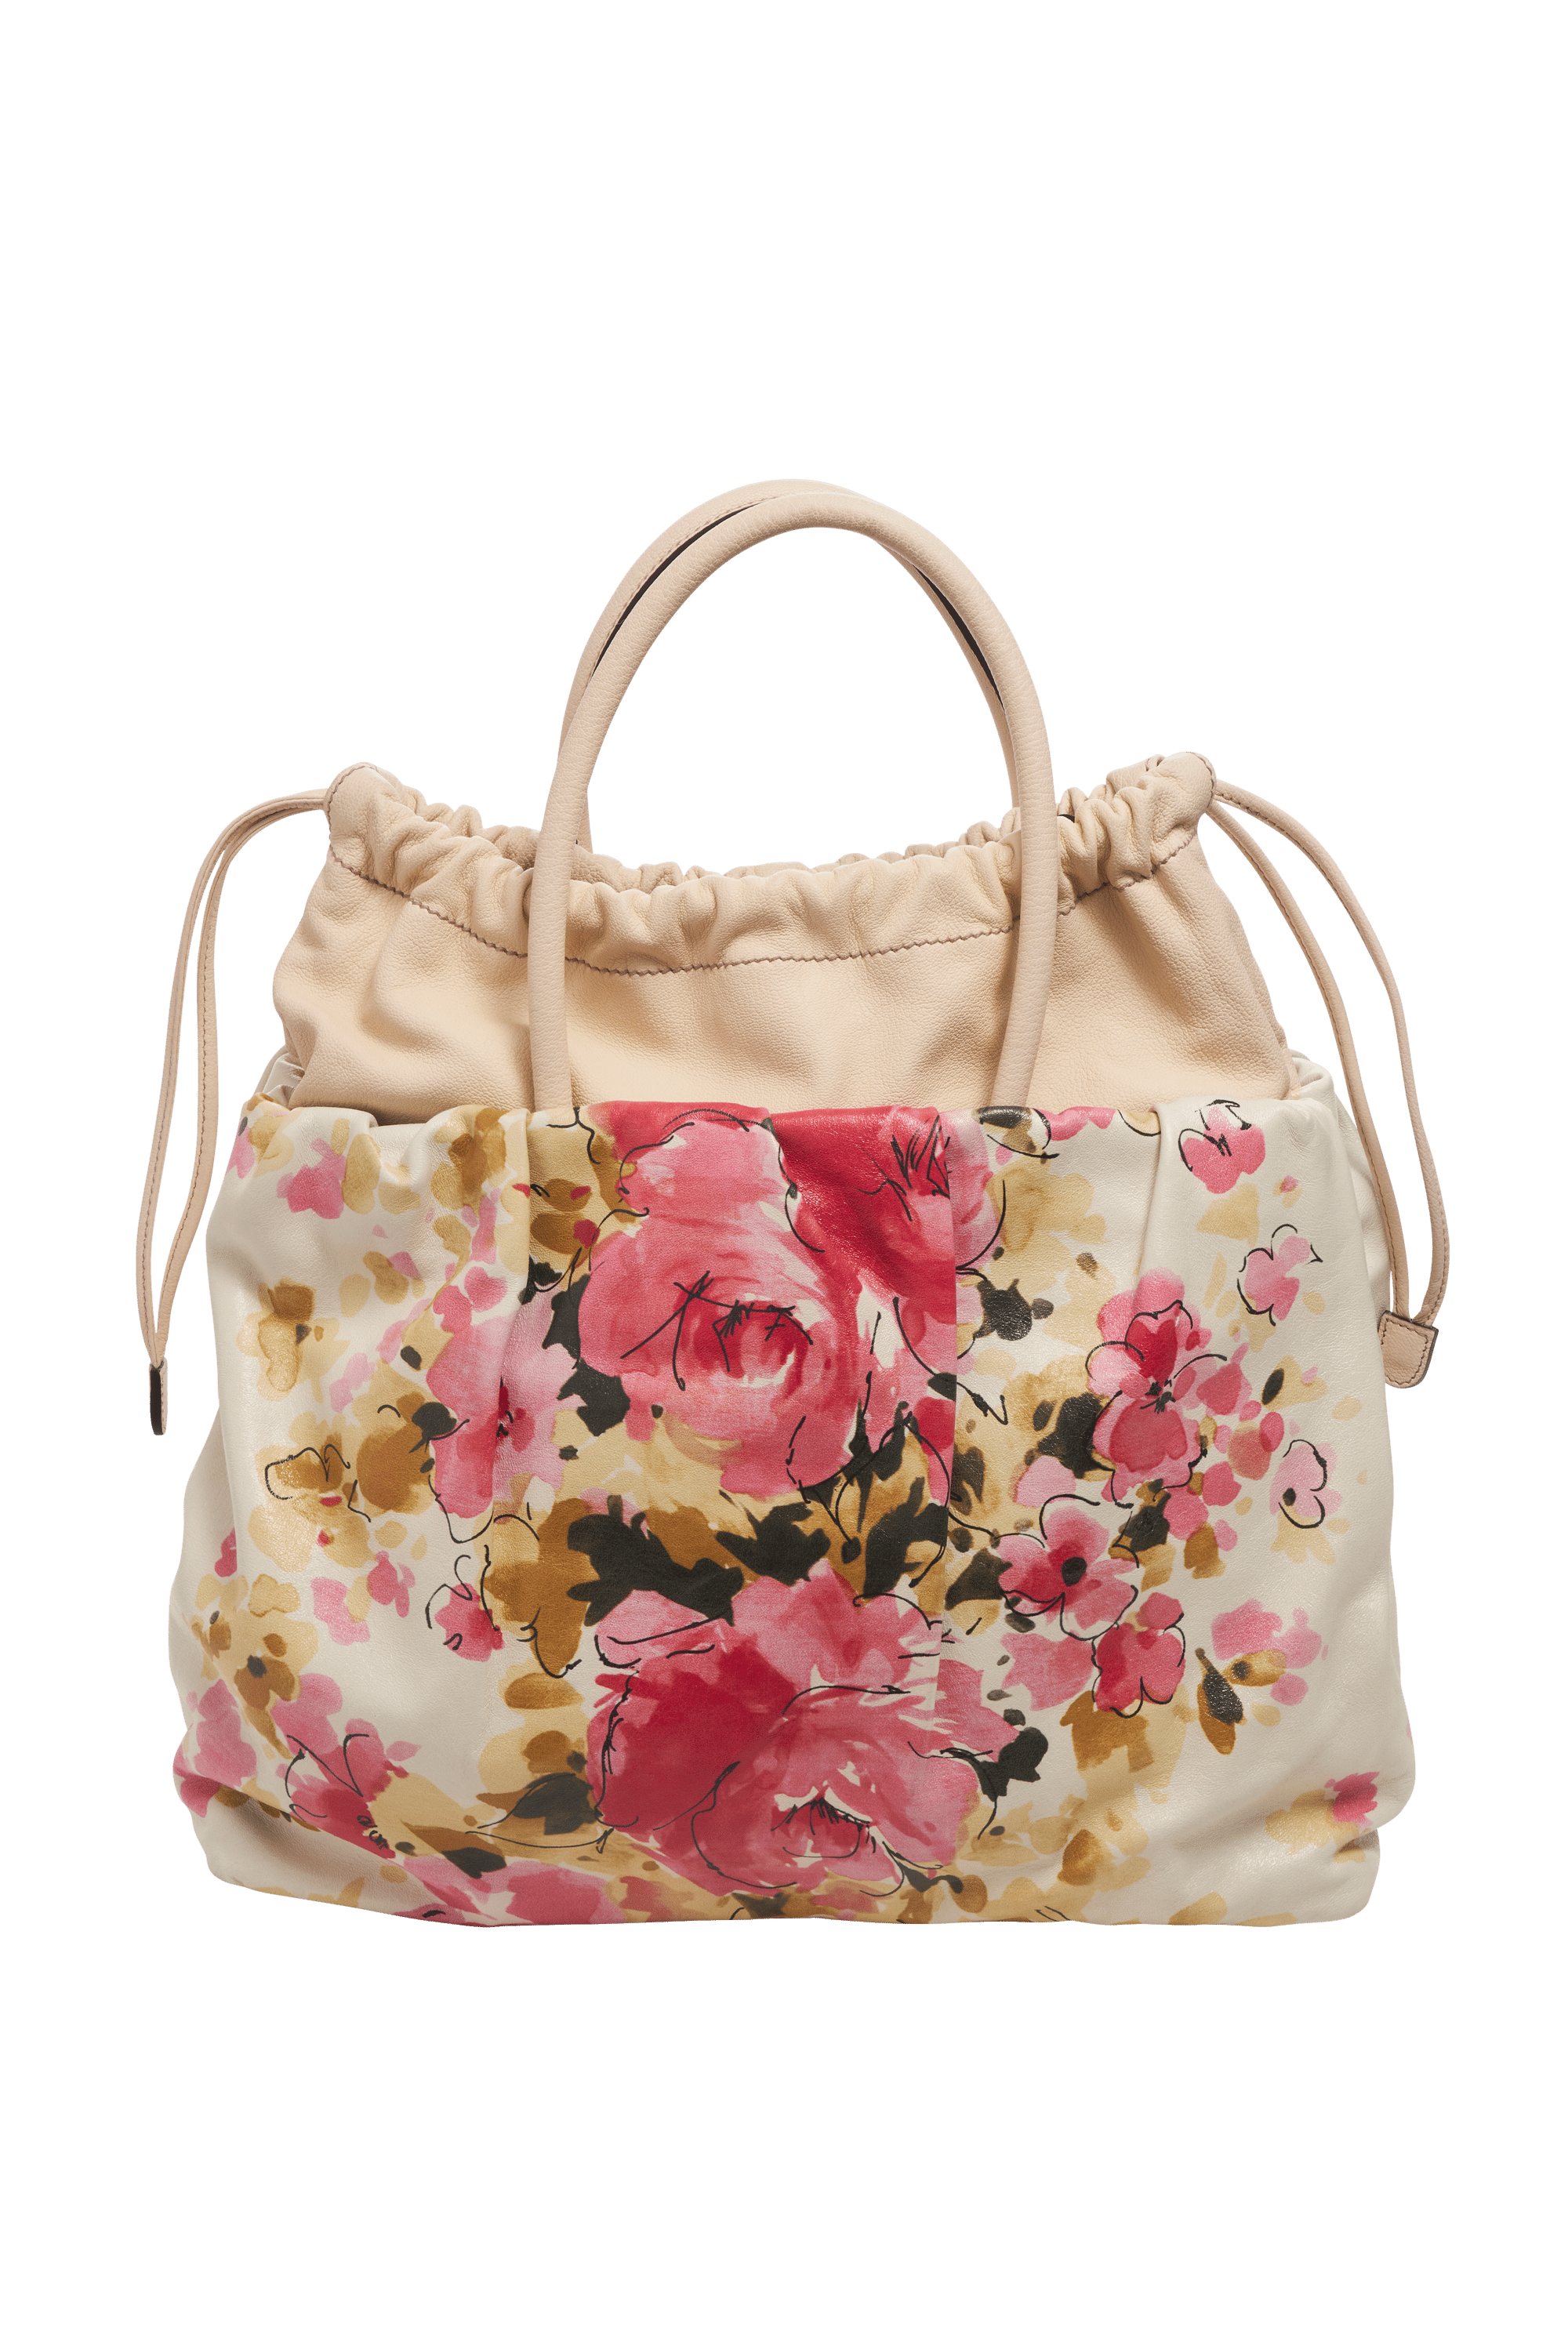 Dolce + Gabbana Water Color Floral Print Purse Large - Foxy Couture Carmel